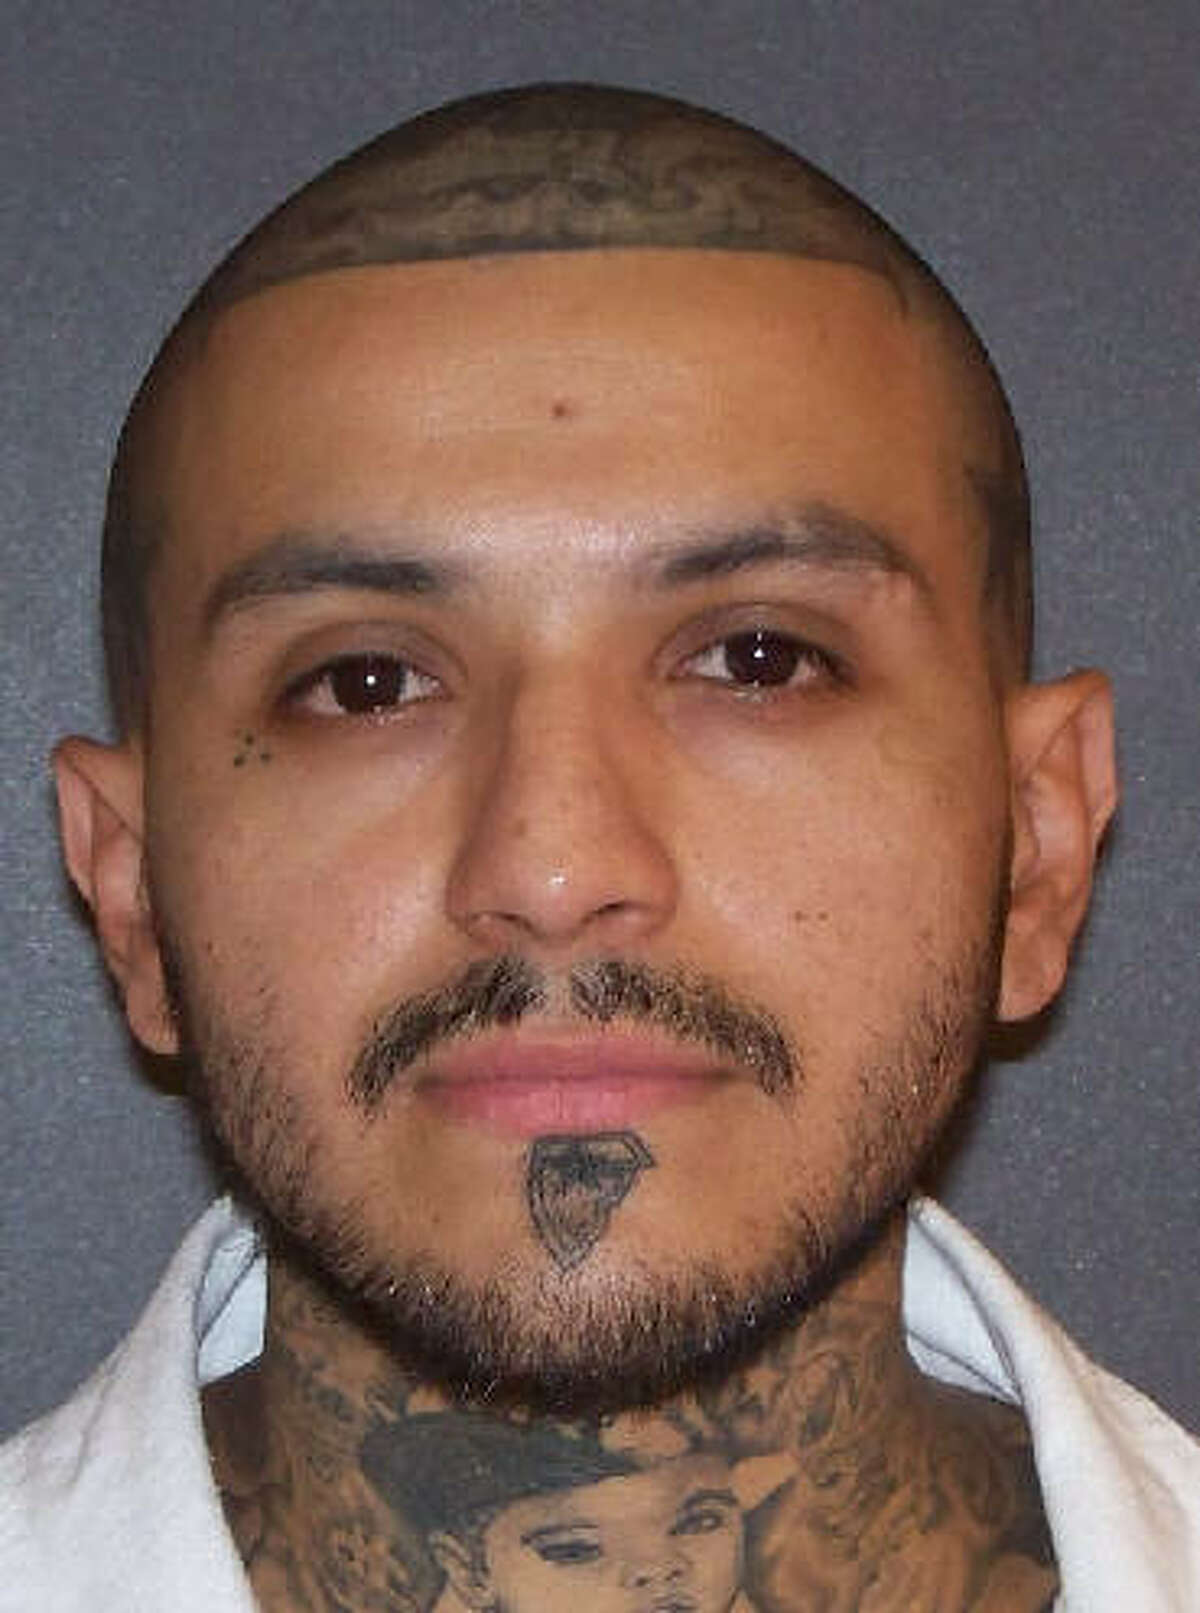 George Badillo was restrained and taken away after his cellmate was found dead from blunt force trauma, officials said. >>Click through the glalery to see the most common crimes in Texas prisons.